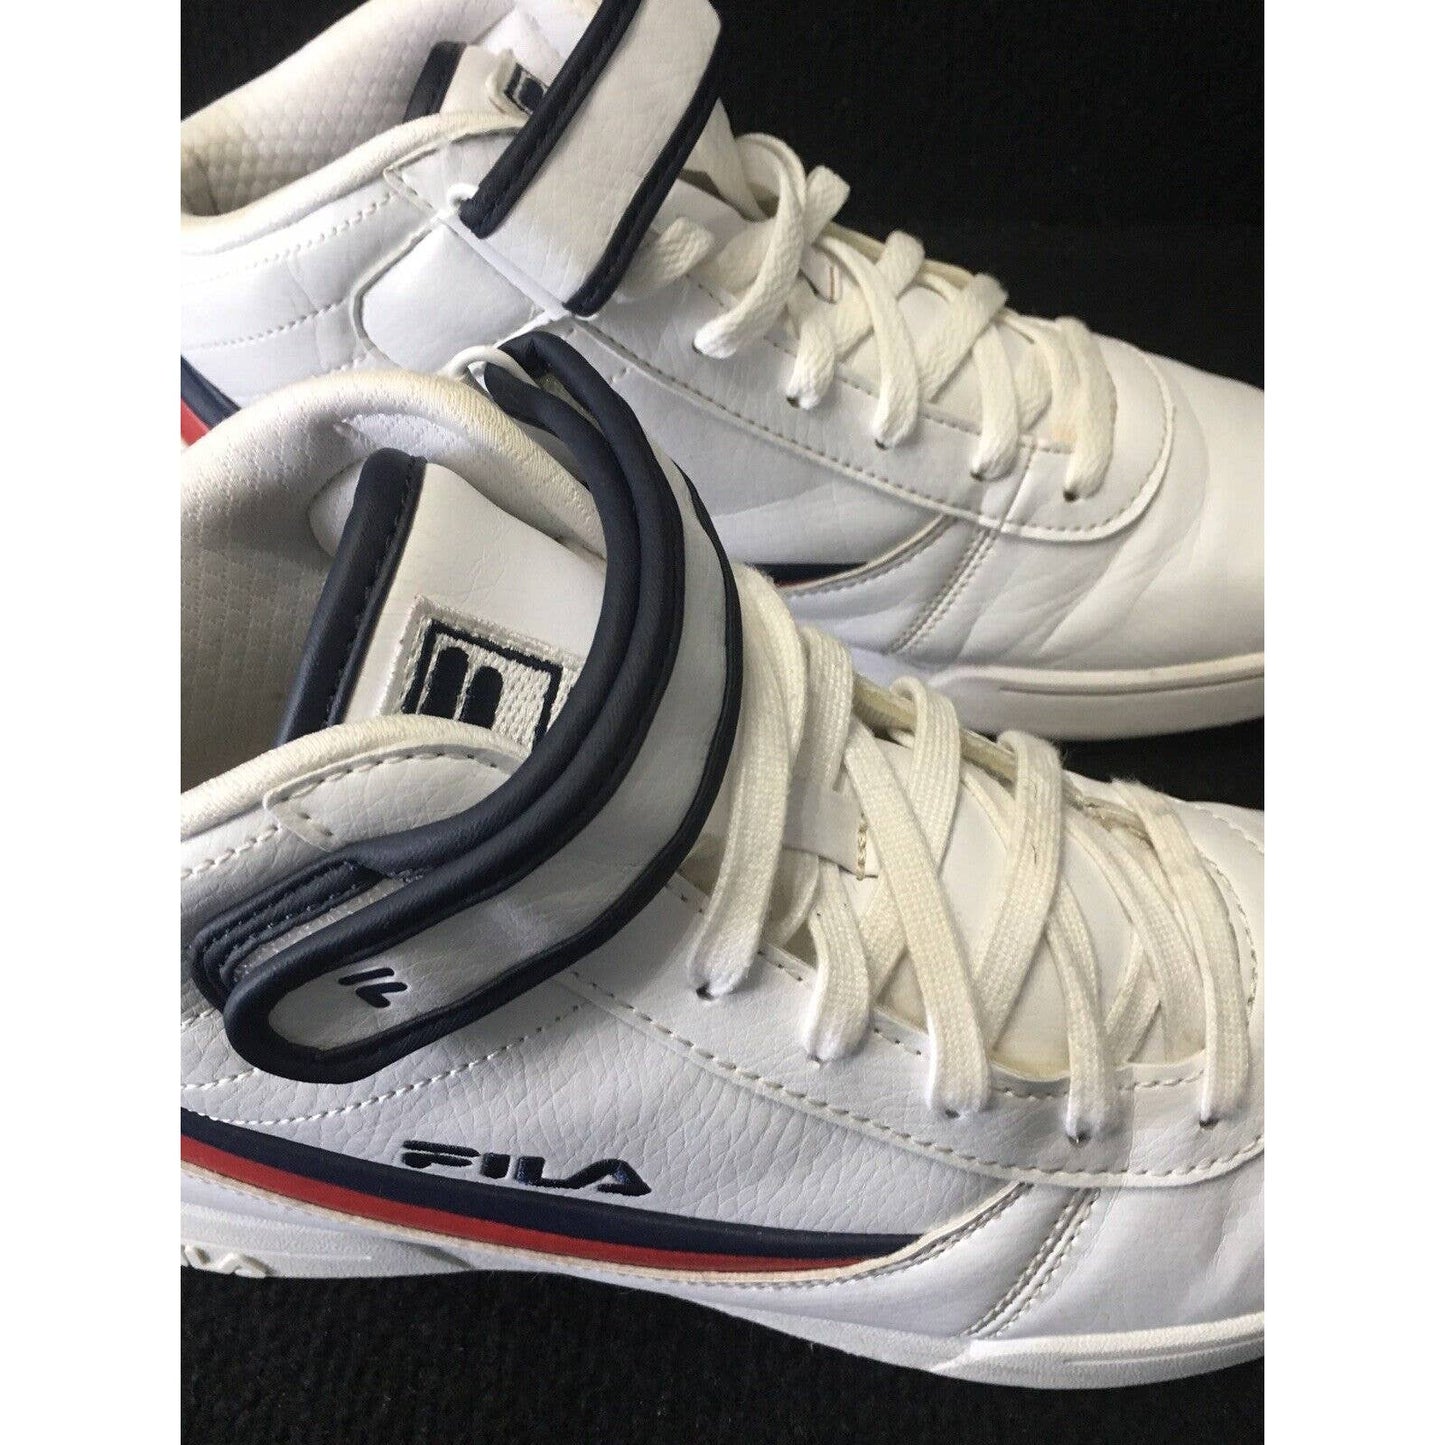 Fila F-13 Weather Tech White / Navy Size 8.5 Sneakers Shoes Boots 1SH40118-125